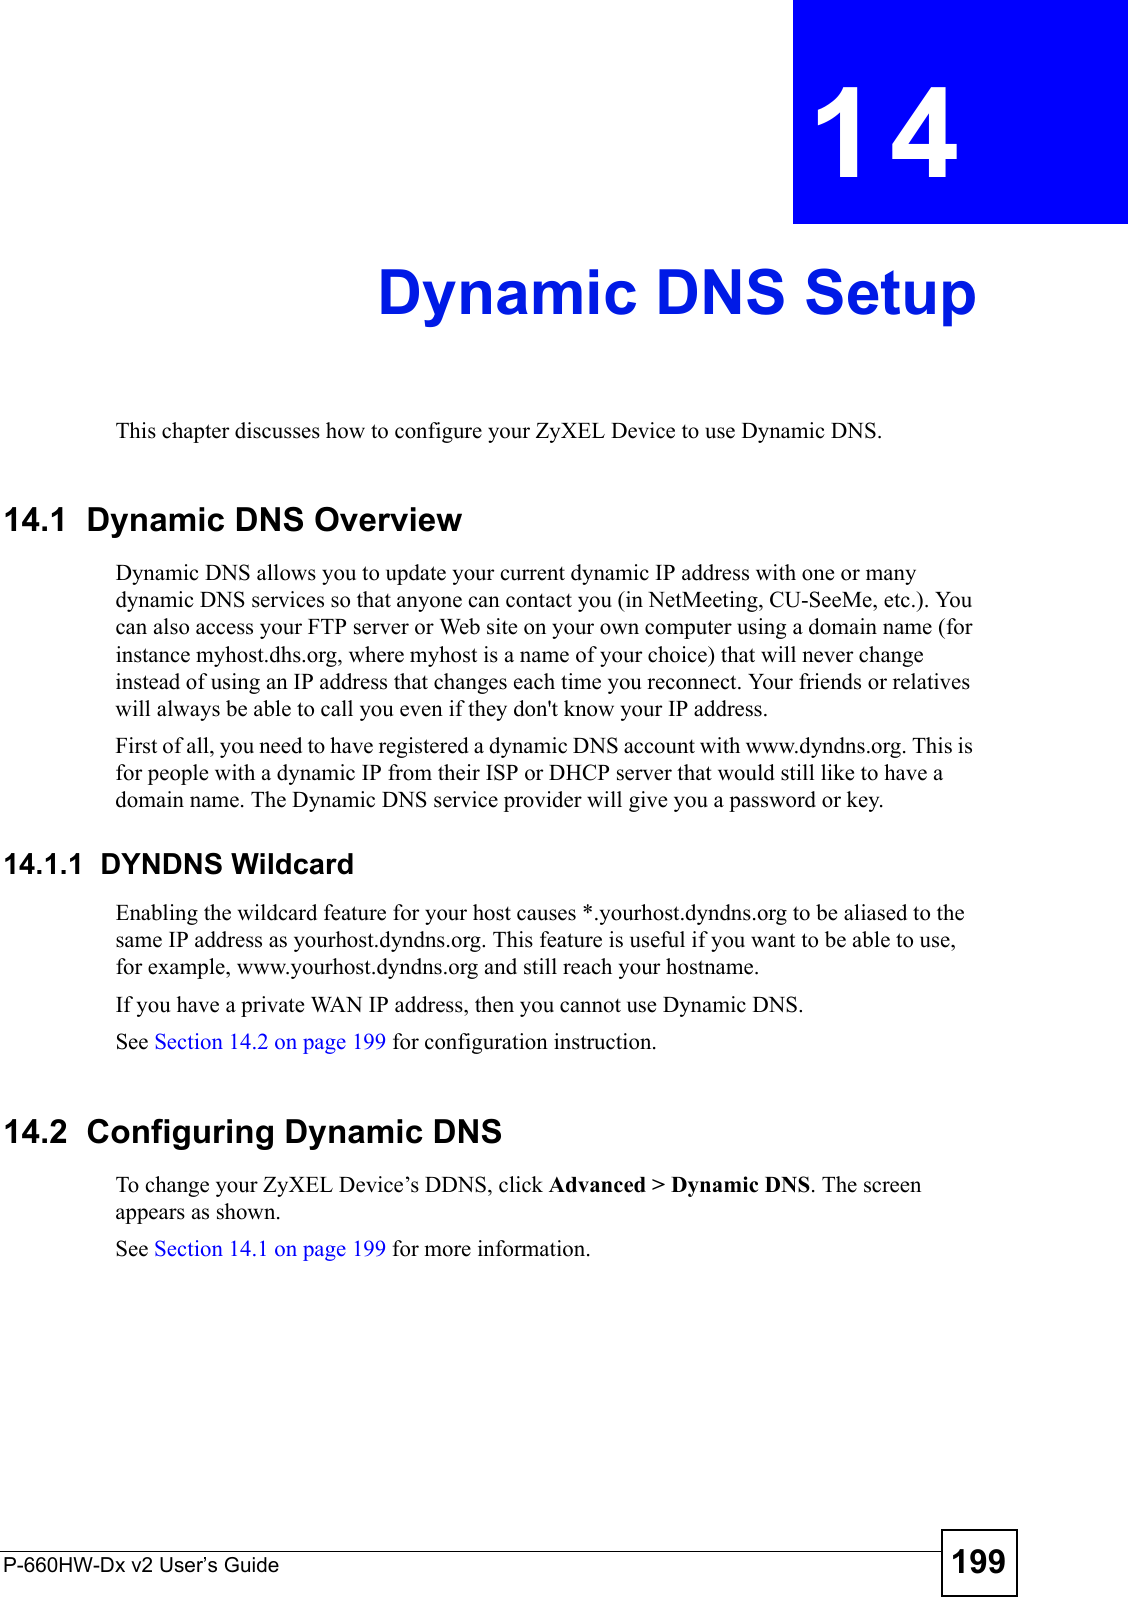 P-660HW-Dx v2 User’s Guide 199CHAPTER  14 Dynamic DNS SetupThis chapter discusses how to configure your ZyXEL Device to use Dynamic DNS.14.1  Dynamic DNS Overview Dynamic DNS allows you to update your current dynamic IP address with one or many dynamic DNS services so that anyone can contact you (in NetMeeting, CU-SeeMe, etc.). You can also access your FTP server or Web site on your own computer using a domain name (for instance myhost.dhs.org, where myhost is a name of your choice) that will never change instead of using an IP address that changes each time you reconnect. Your friends or relatives will always be able to call you even if they don&apos;t know your IP address.First of all, you need to have registered a dynamic DNS account with www.dyndns.org. This is for people with a dynamic IP from their ISP or DHCP server that would still like to have a domain name. The Dynamic DNS service provider will give you a password or key. 14.1.1  DYNDNS WildcardEnabling the wildcard feature for your host causes *.yourhost.dyndns.org to be aliased to the same IP address as yourhost.dyndns.org. This feature is useful if you want to be able to use, for example, www.yourhost.dyndns.org and still reach your hostname.If you have a private WAN IP address, then you cannot use Dynamic DNS.See Section 14.2 on page 199 for configuration instruction. 14.2  Configuring Dynamic DNS To change your ZyXEL Device’s DDNS, click Advanced &gt; Dynamic DNS. The screen appears as shown.See Section 14.1 on page 199 for more information. 